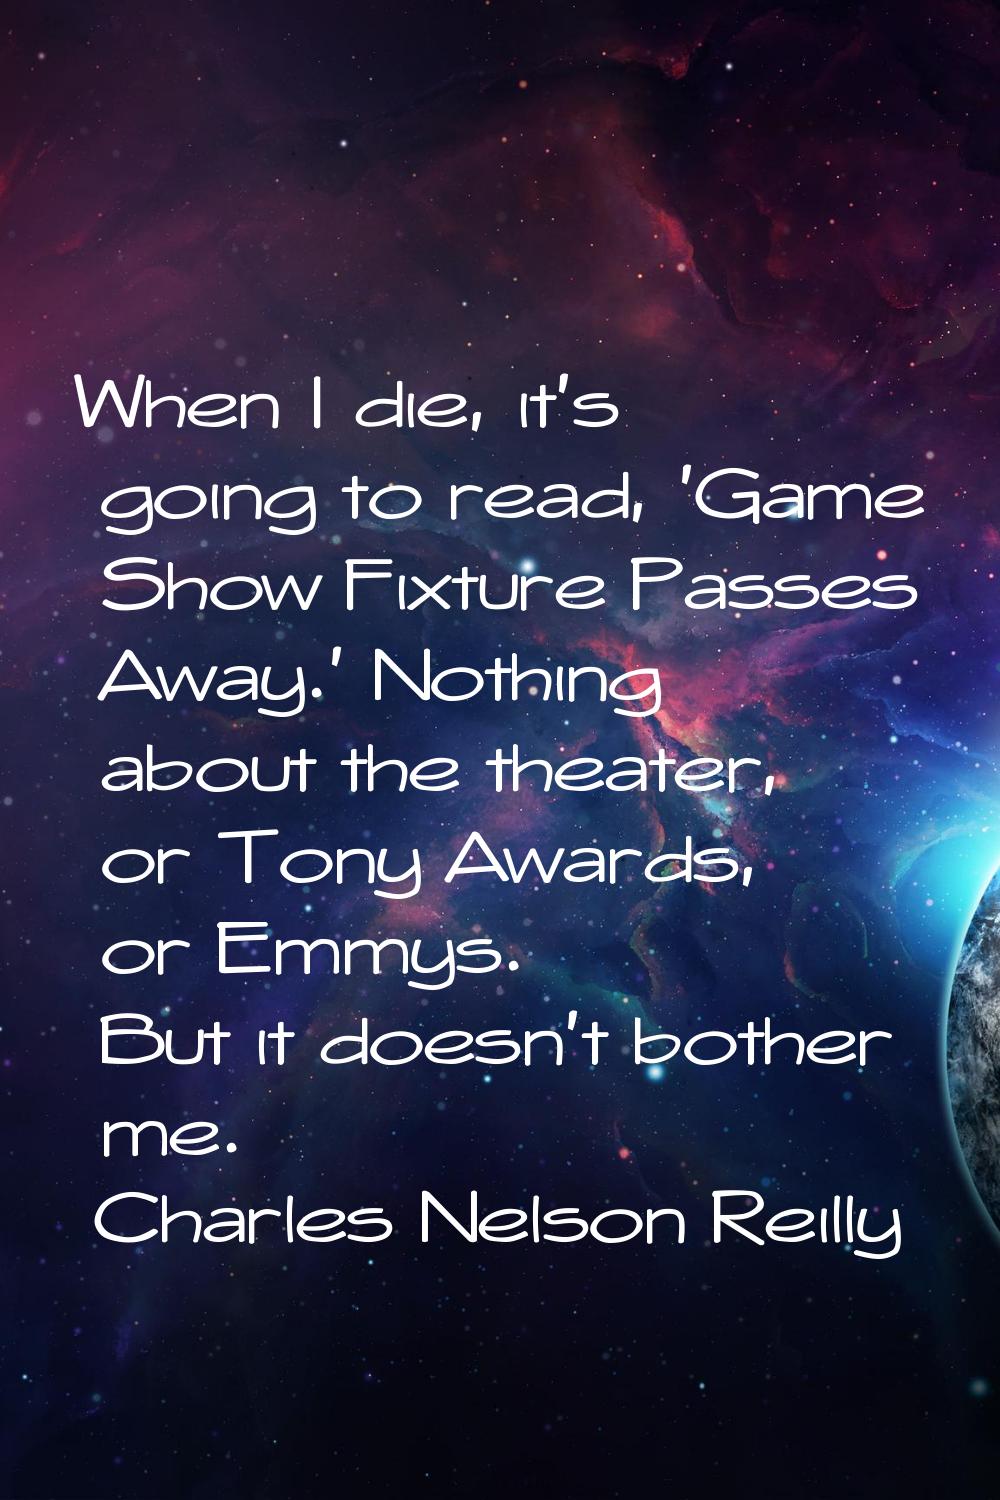 When I die, it's going to read, 'Game Show Fixture Passes Away.' Nothing about the theater, or Tony